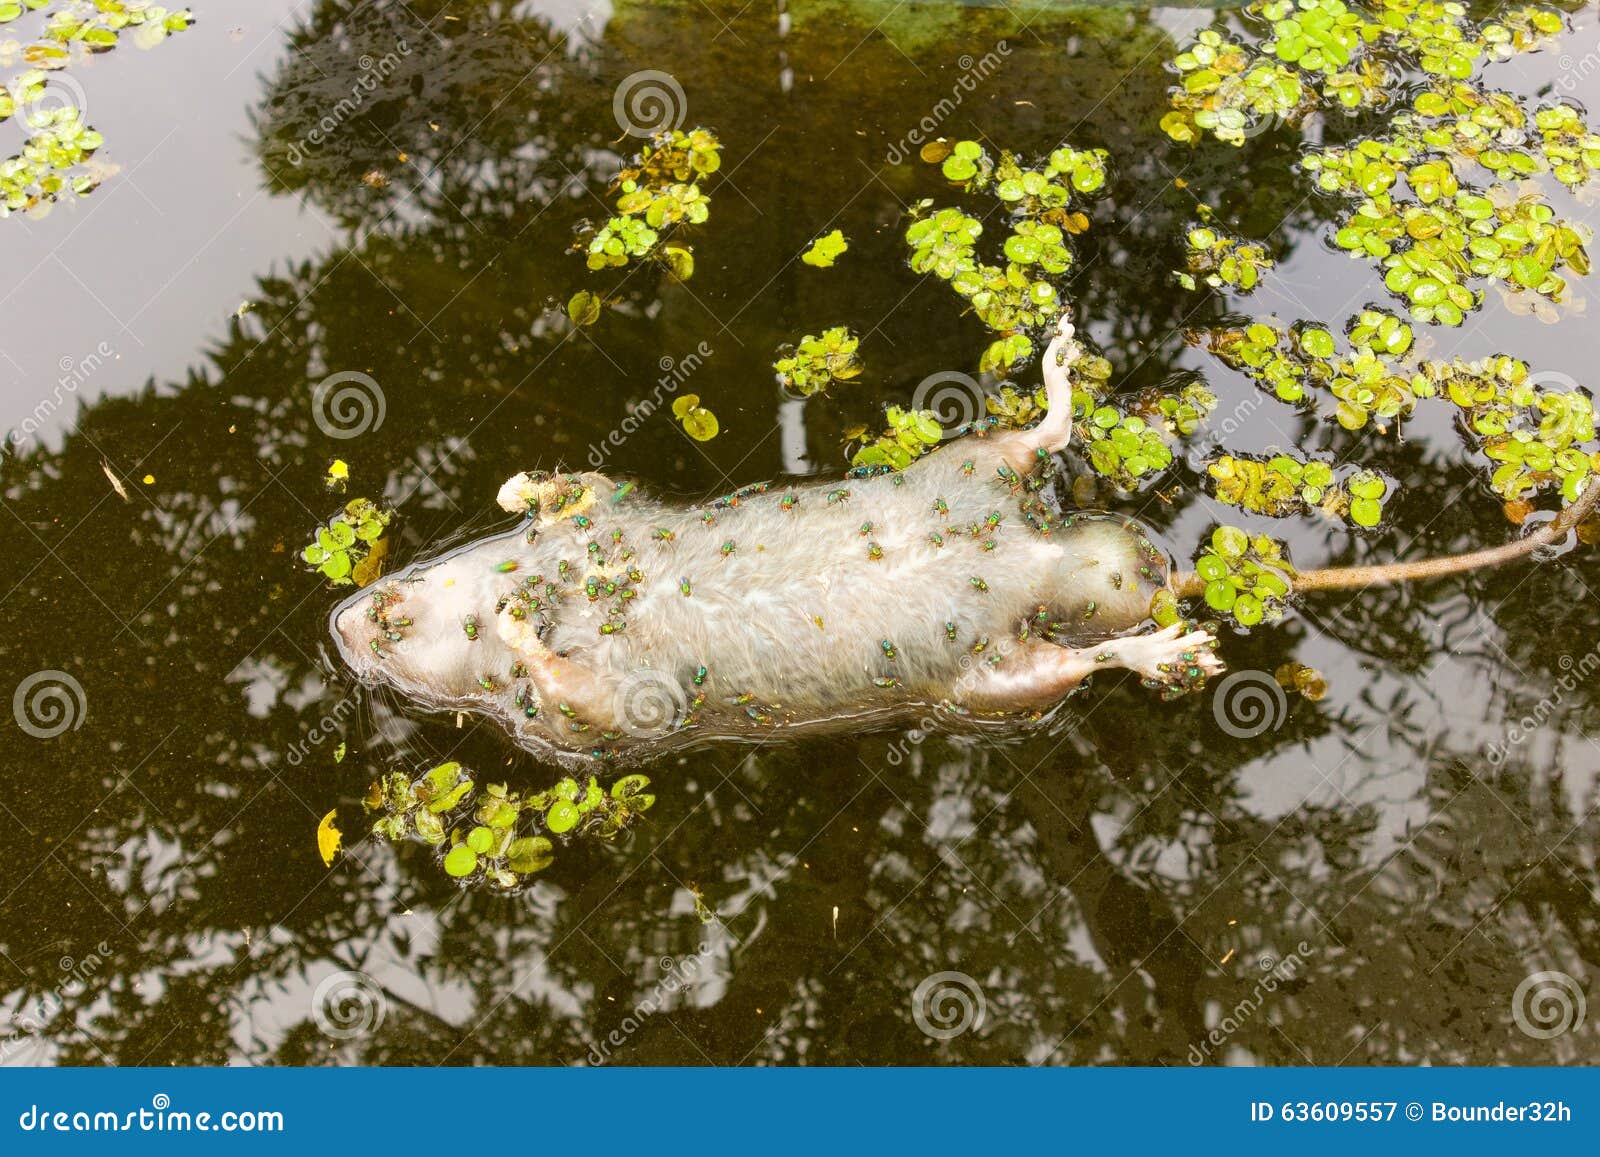 A Dead Rodent Floating in Water Stock Image - Image of floating, ugly:  63609557